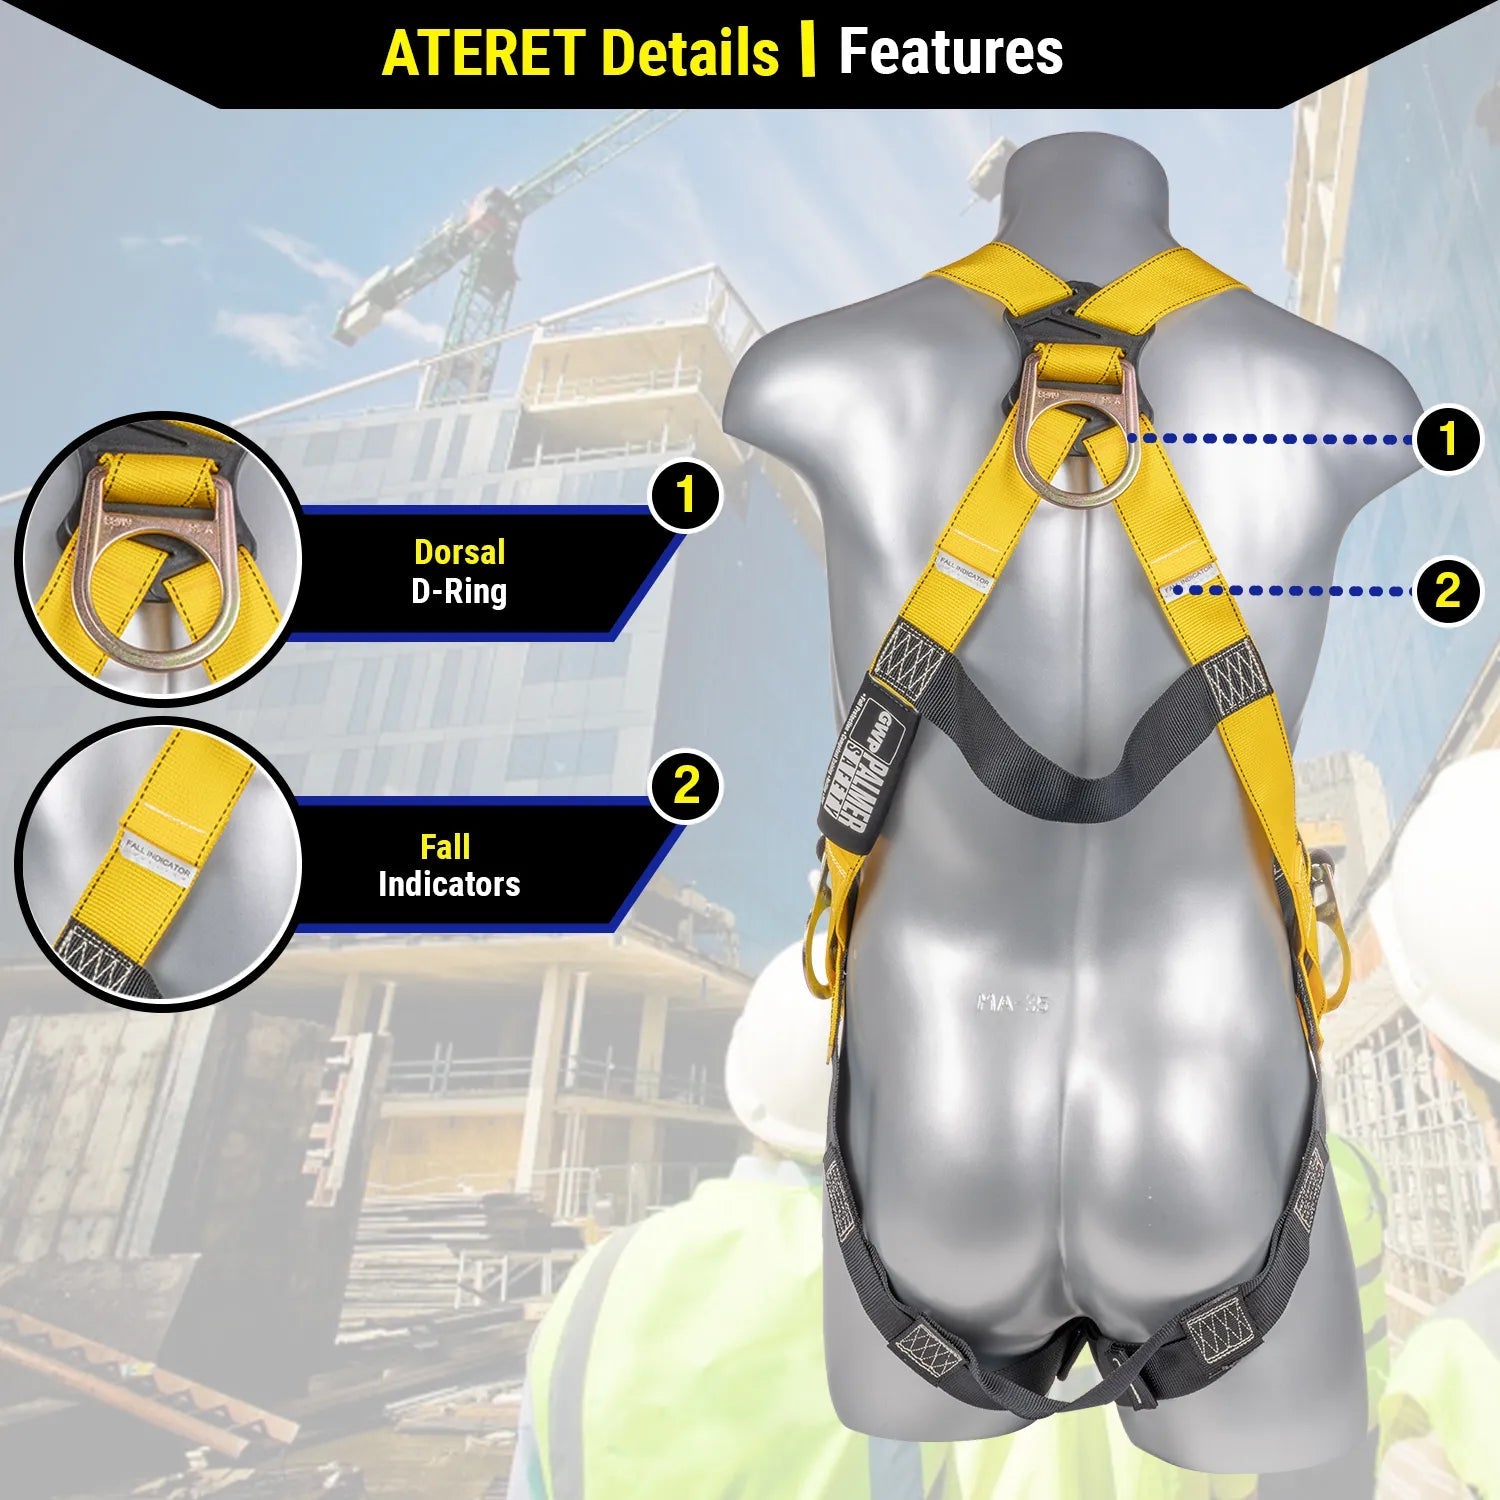 Construction Safety Harness 3 Point Pass-Thru Legs, Back/Side D-Rings - Defender Safety